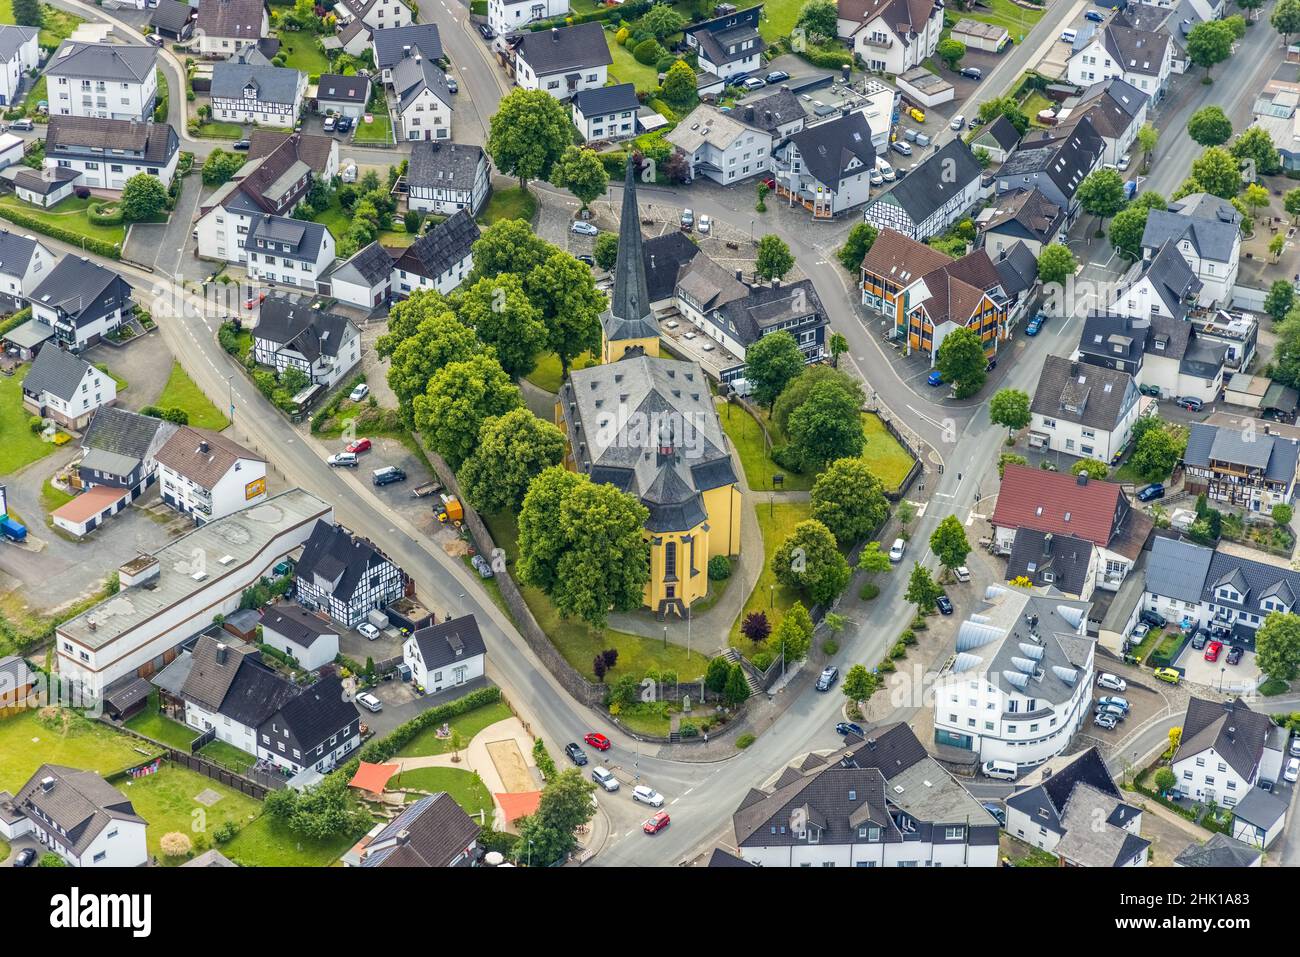 Aerial view, catholic church St. Severin, Wenden, Sauerland, North Rhine-Westphalia, Germany, place of worship, DE, Europe, religious community, place Stock Photo